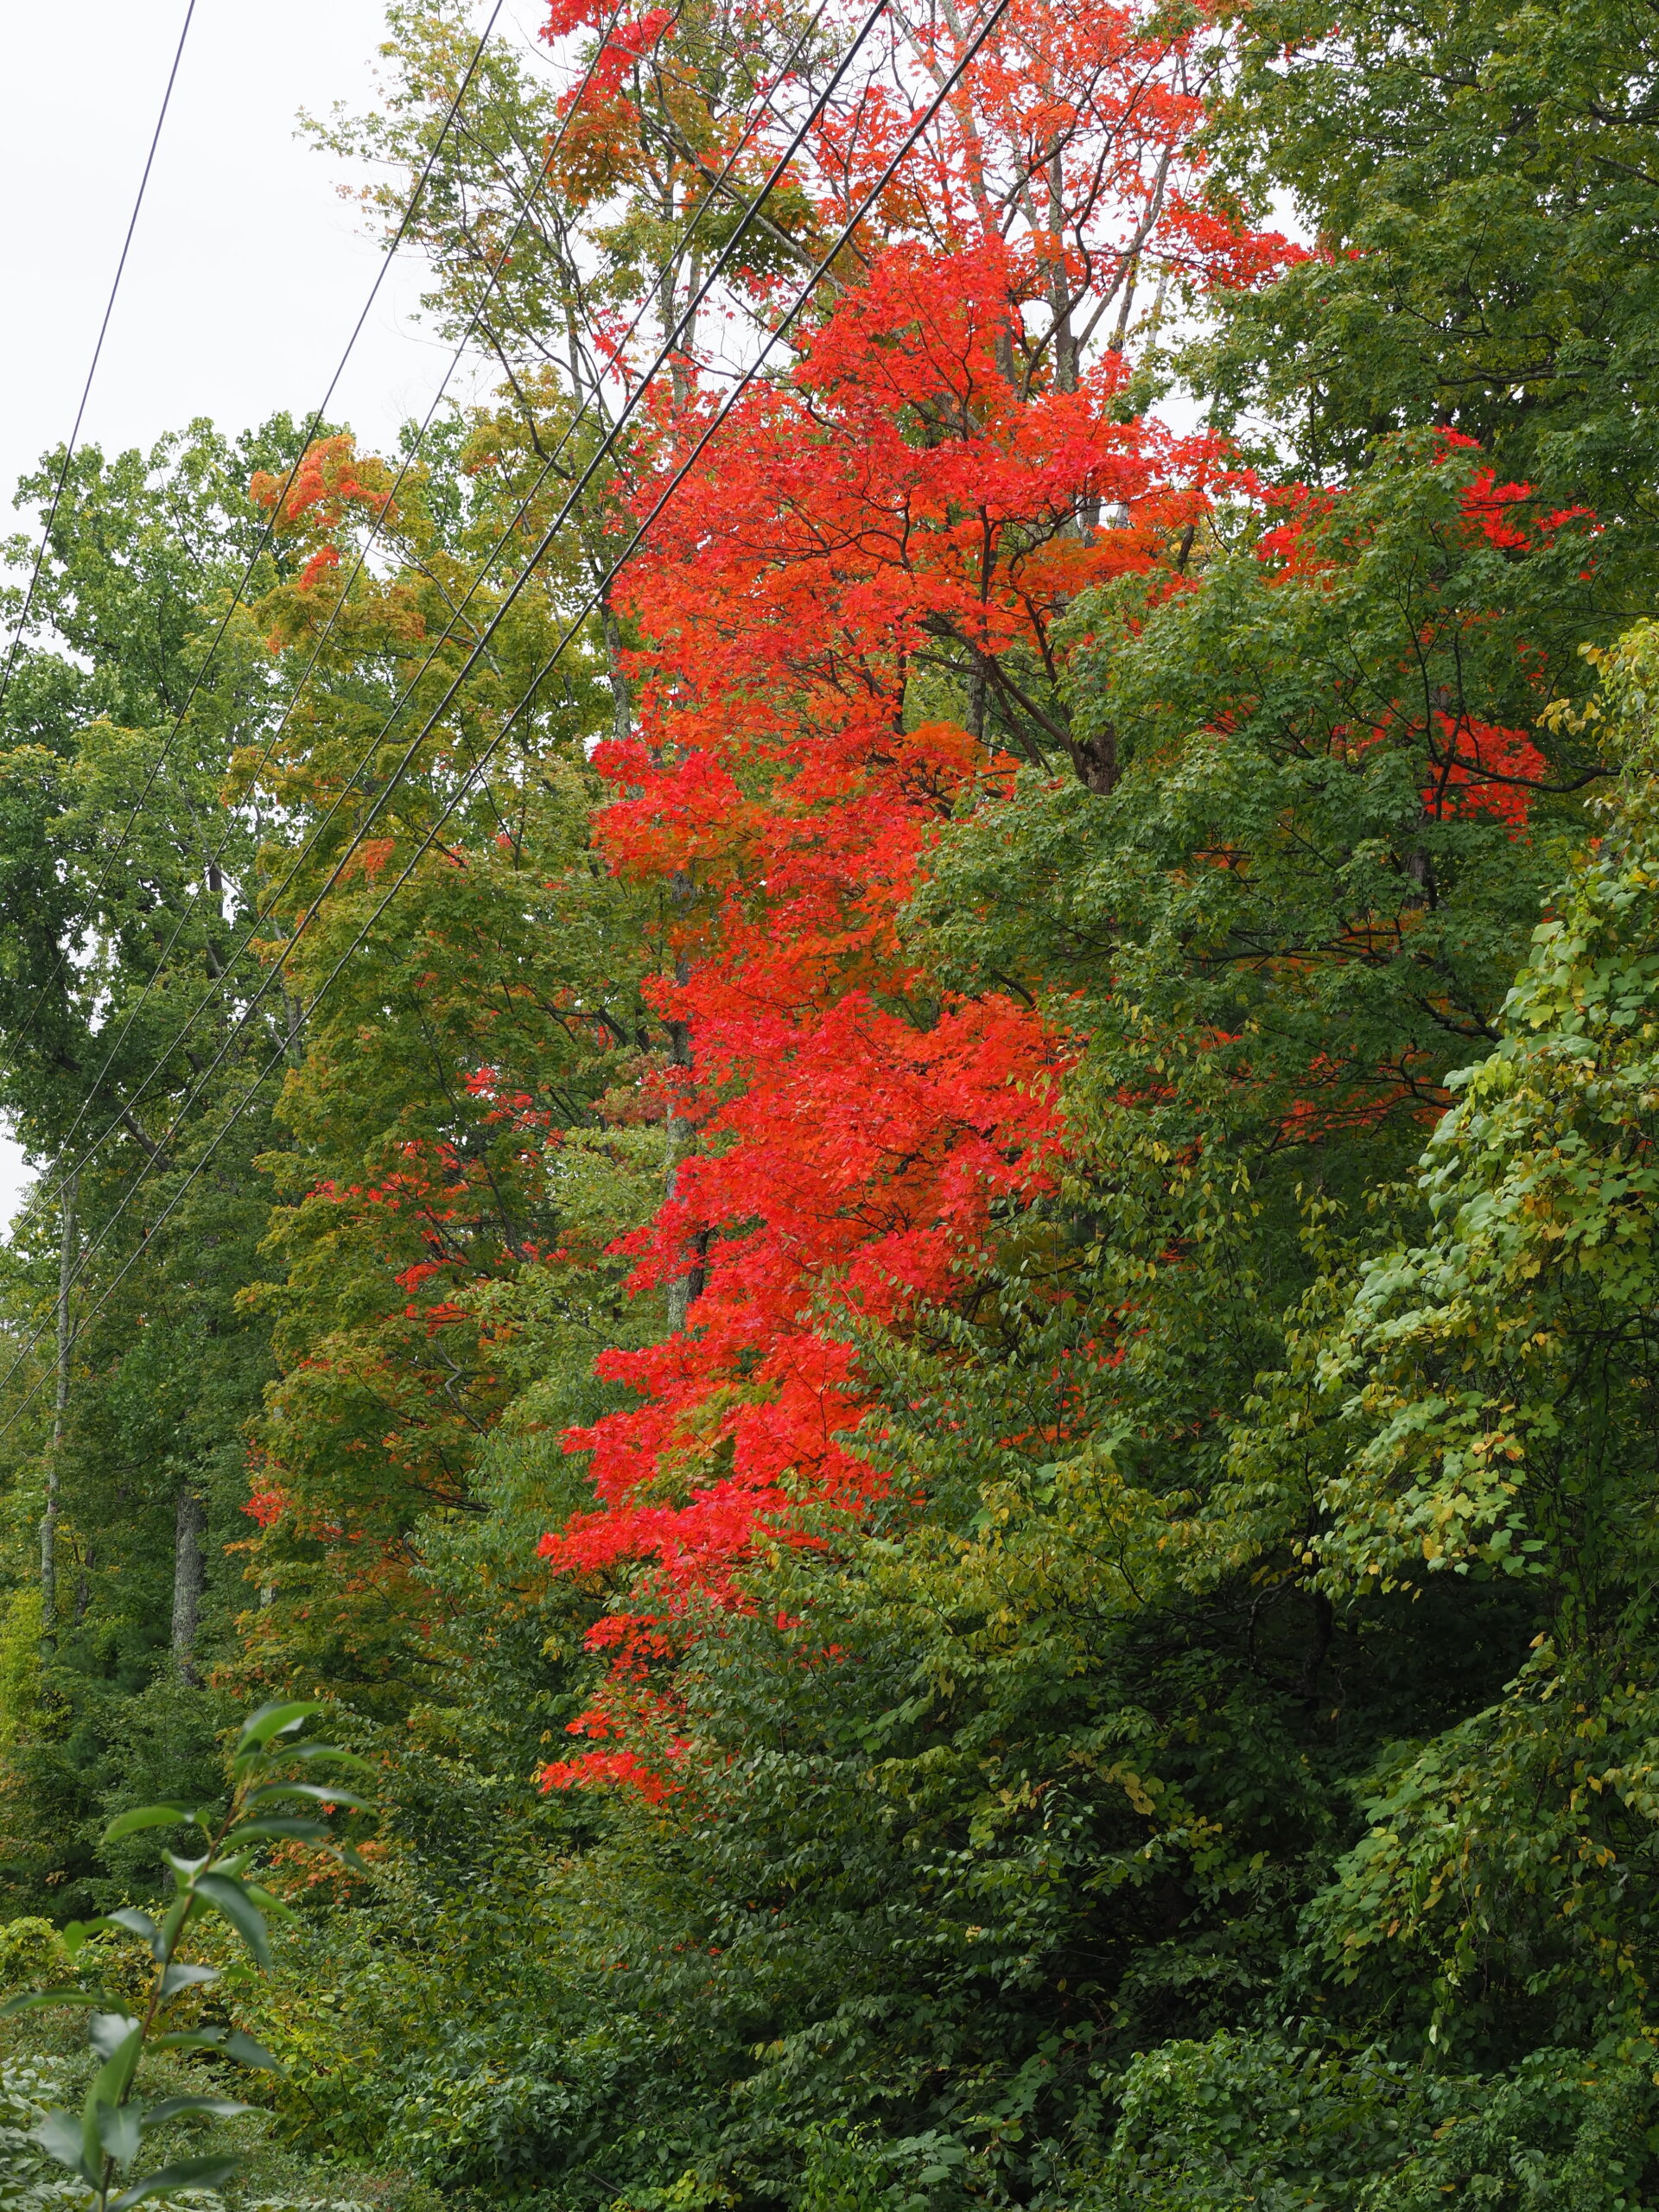 Just off Route 28 in Ulster County, the utility right of way has been cleared recently allowing this sighting of a maple in full fall color.  ANDREW MESSINGER